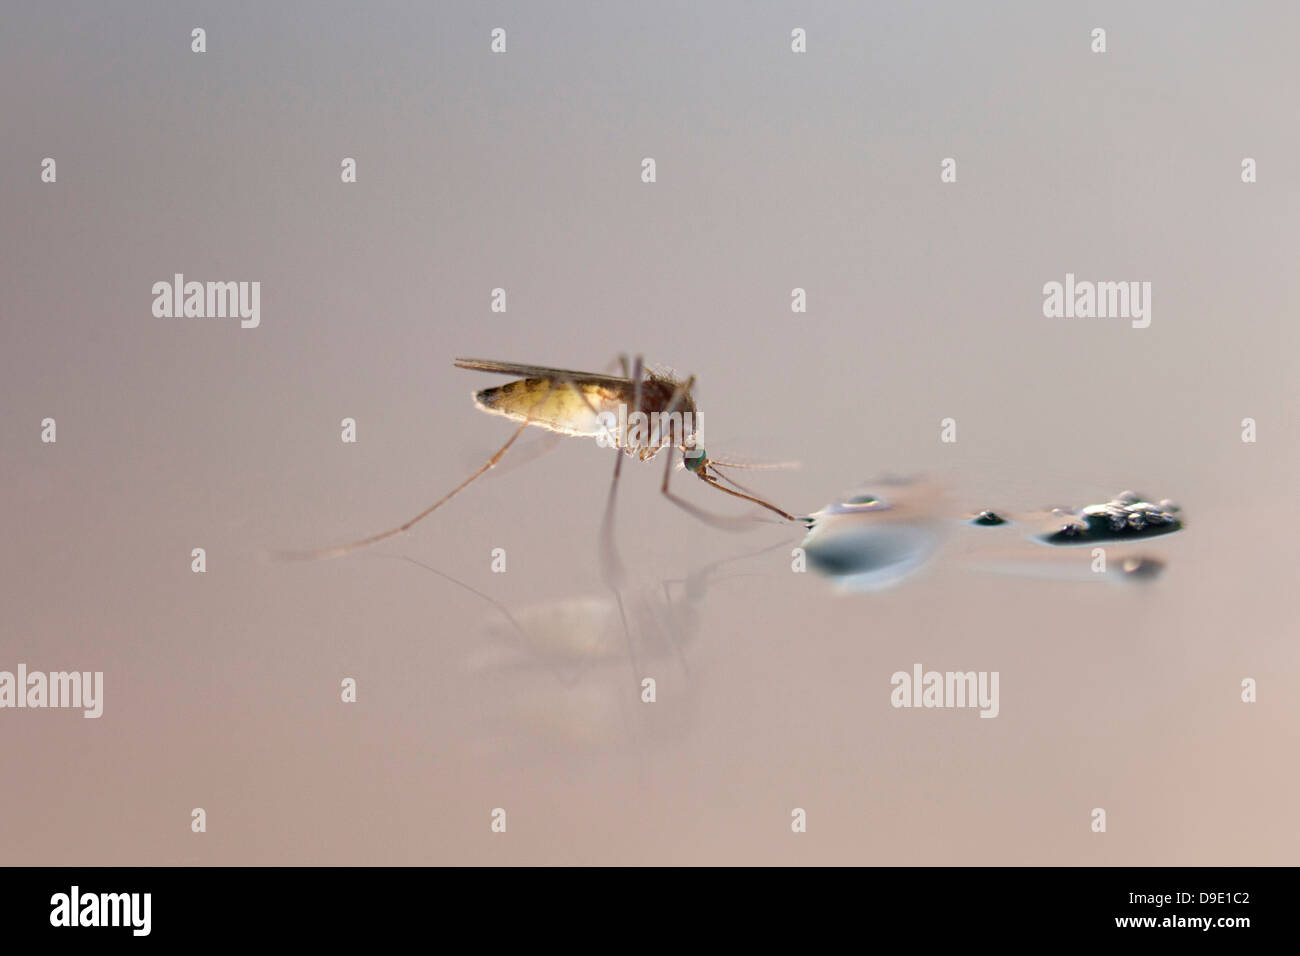 Close up view of a mosquito drinking water Stock Photo